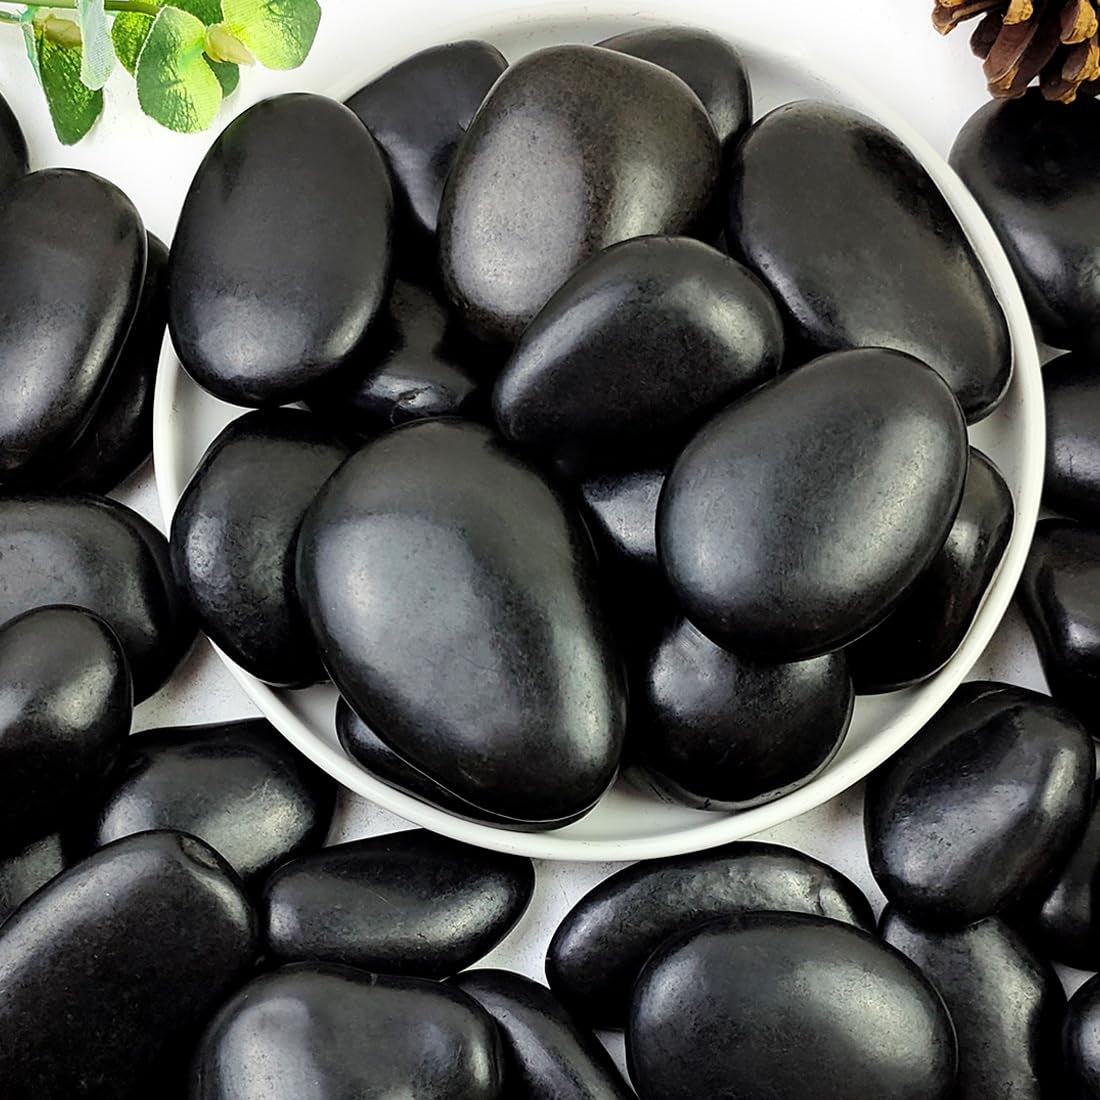 5Lbs White River Rocks, 2-3 Inch Natural Pebbles for Indoor Plants, High Polished Decorative Stones Vase Filler Fish Tank Aquariums Landscaping Garden Outdoor and Indoor DIY